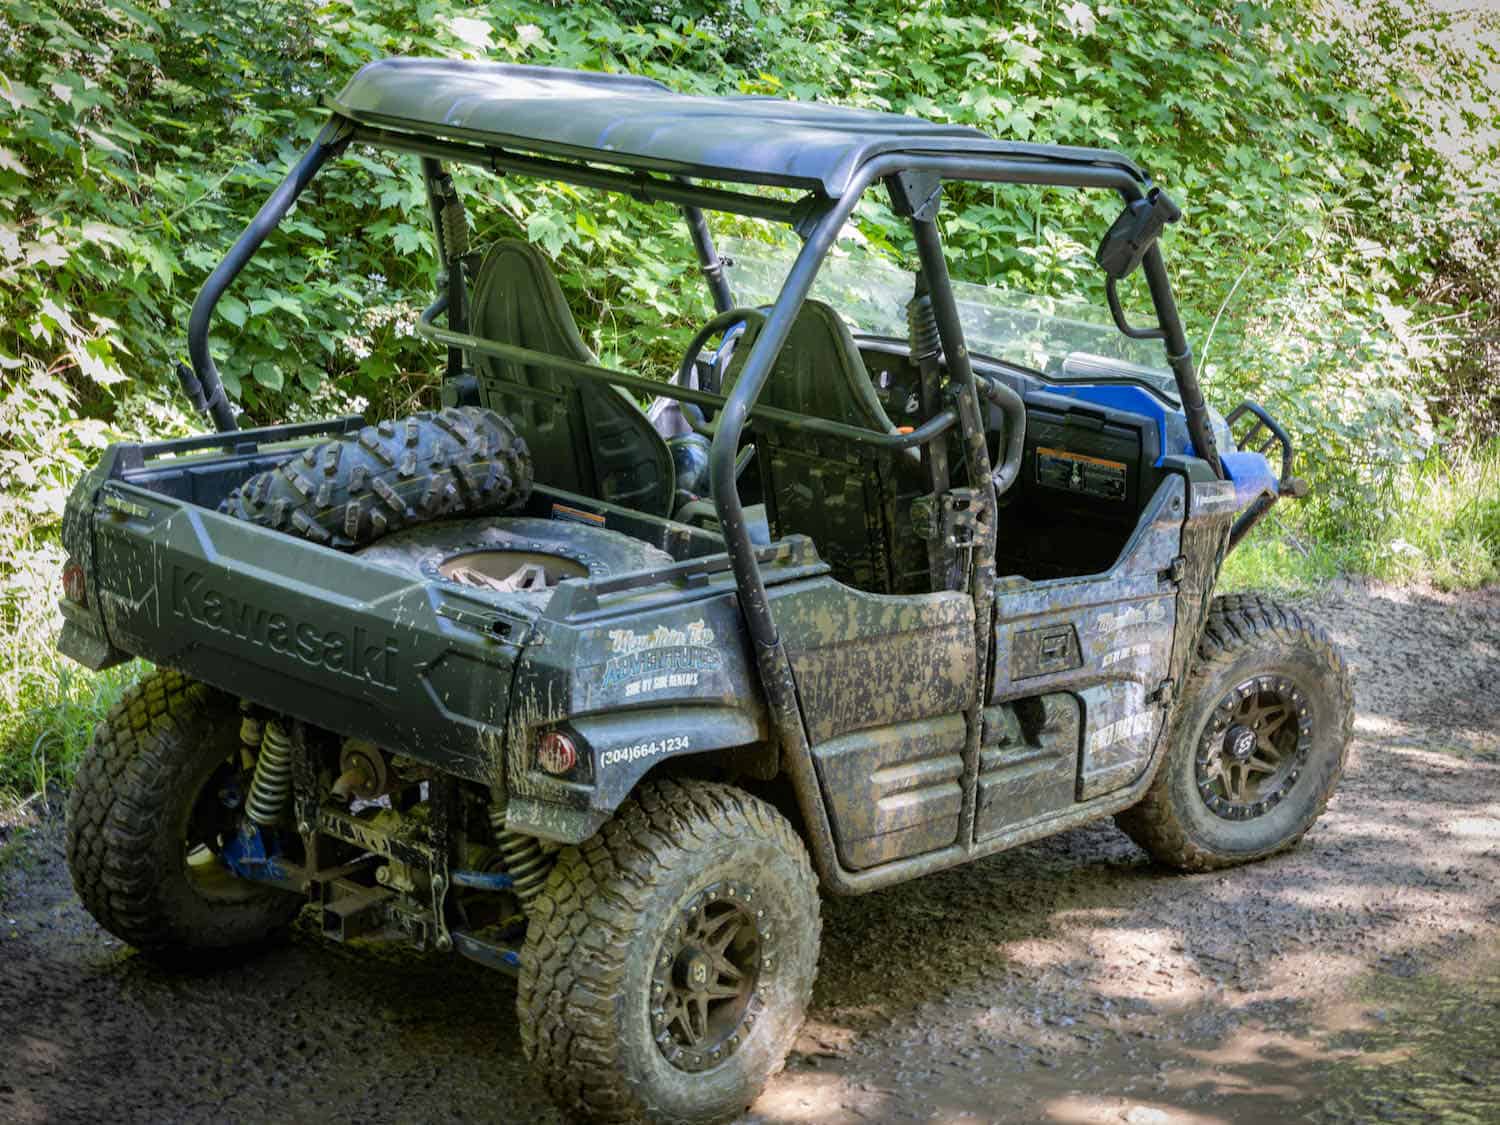 Muddy ATV parked on a trail.